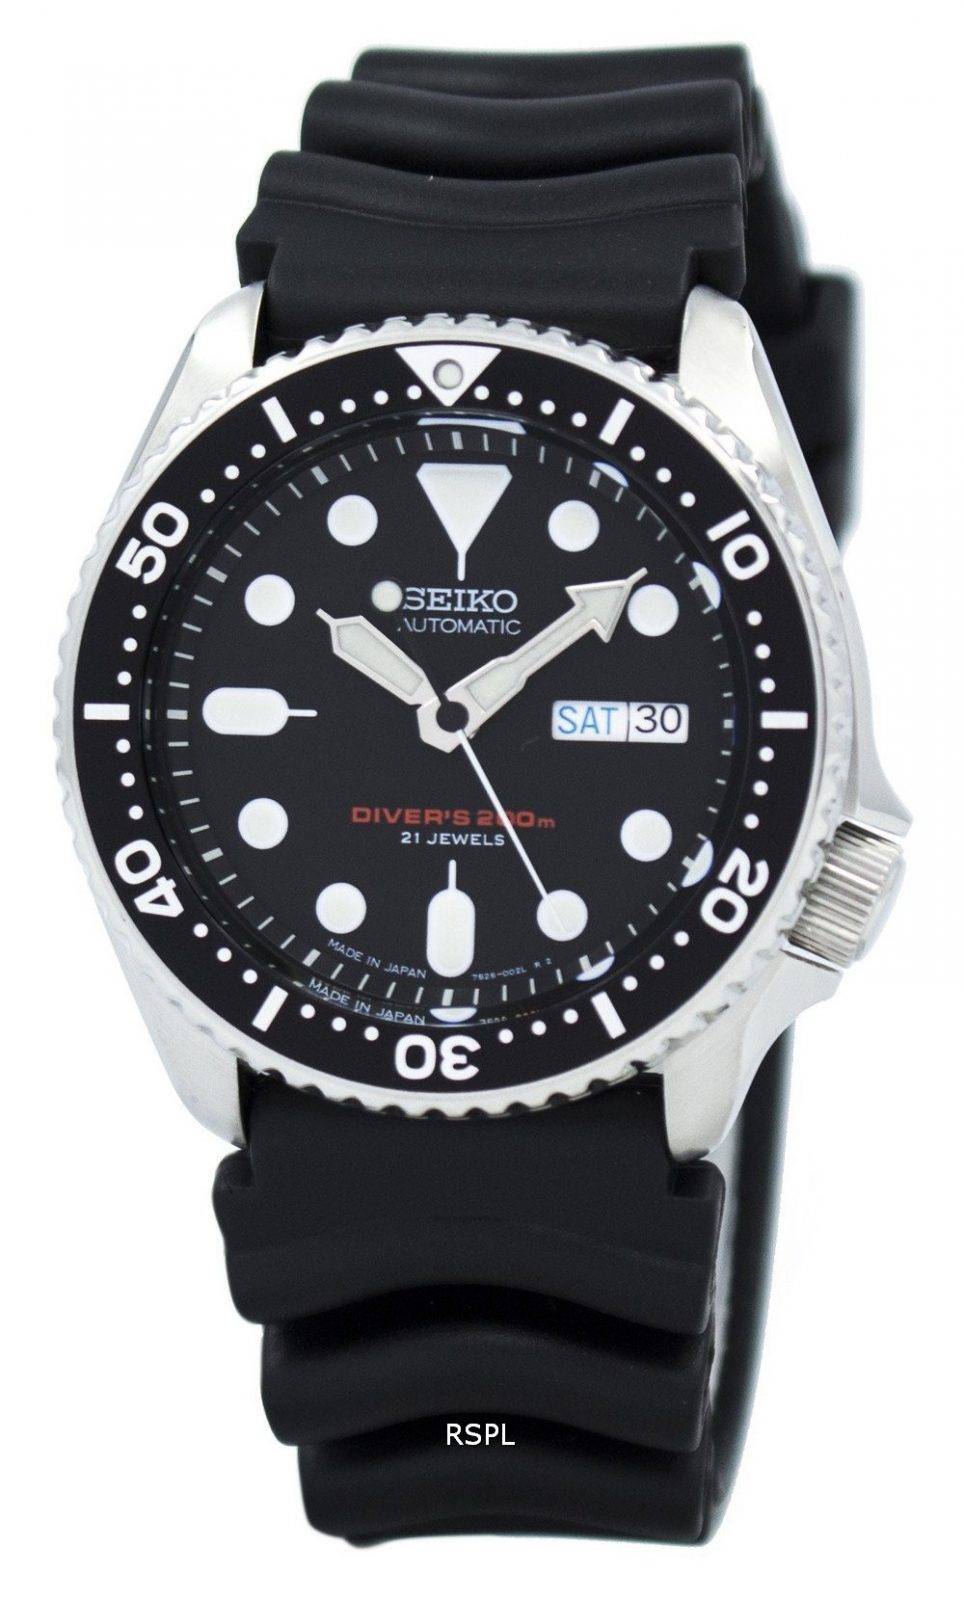 Seiko Automatic Divers 200M SKX007J1 Watch - CityWatches.co.nz